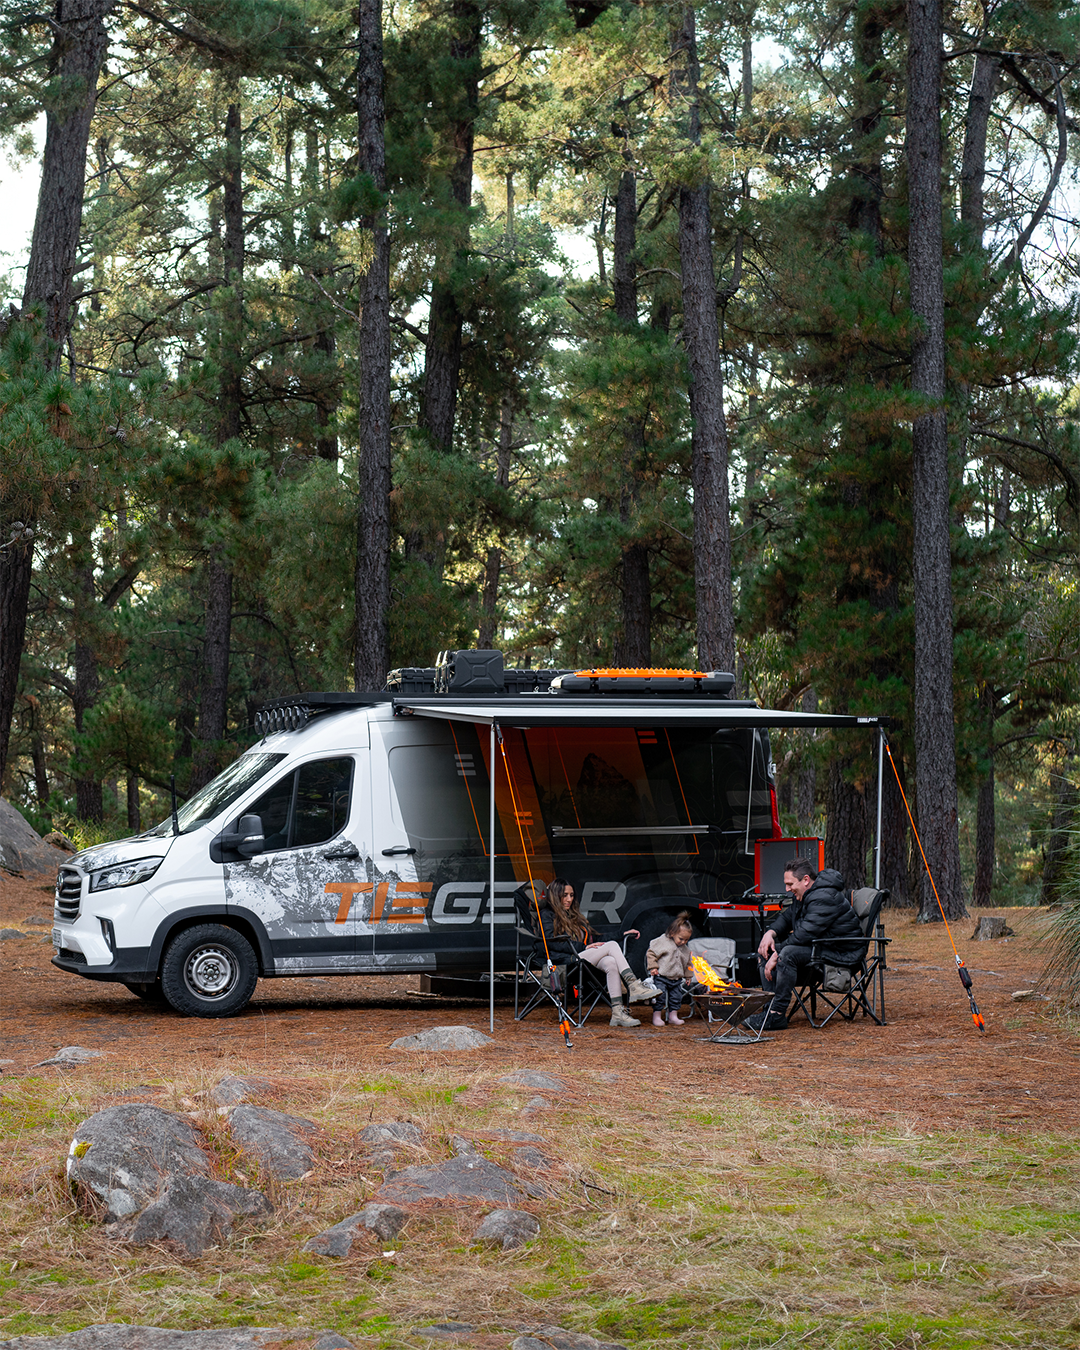 Sitting around the fire in the forrest camping with the family | Van camping | Camping Accessories | Tiegear Guy Rope | Screw in Pegs 